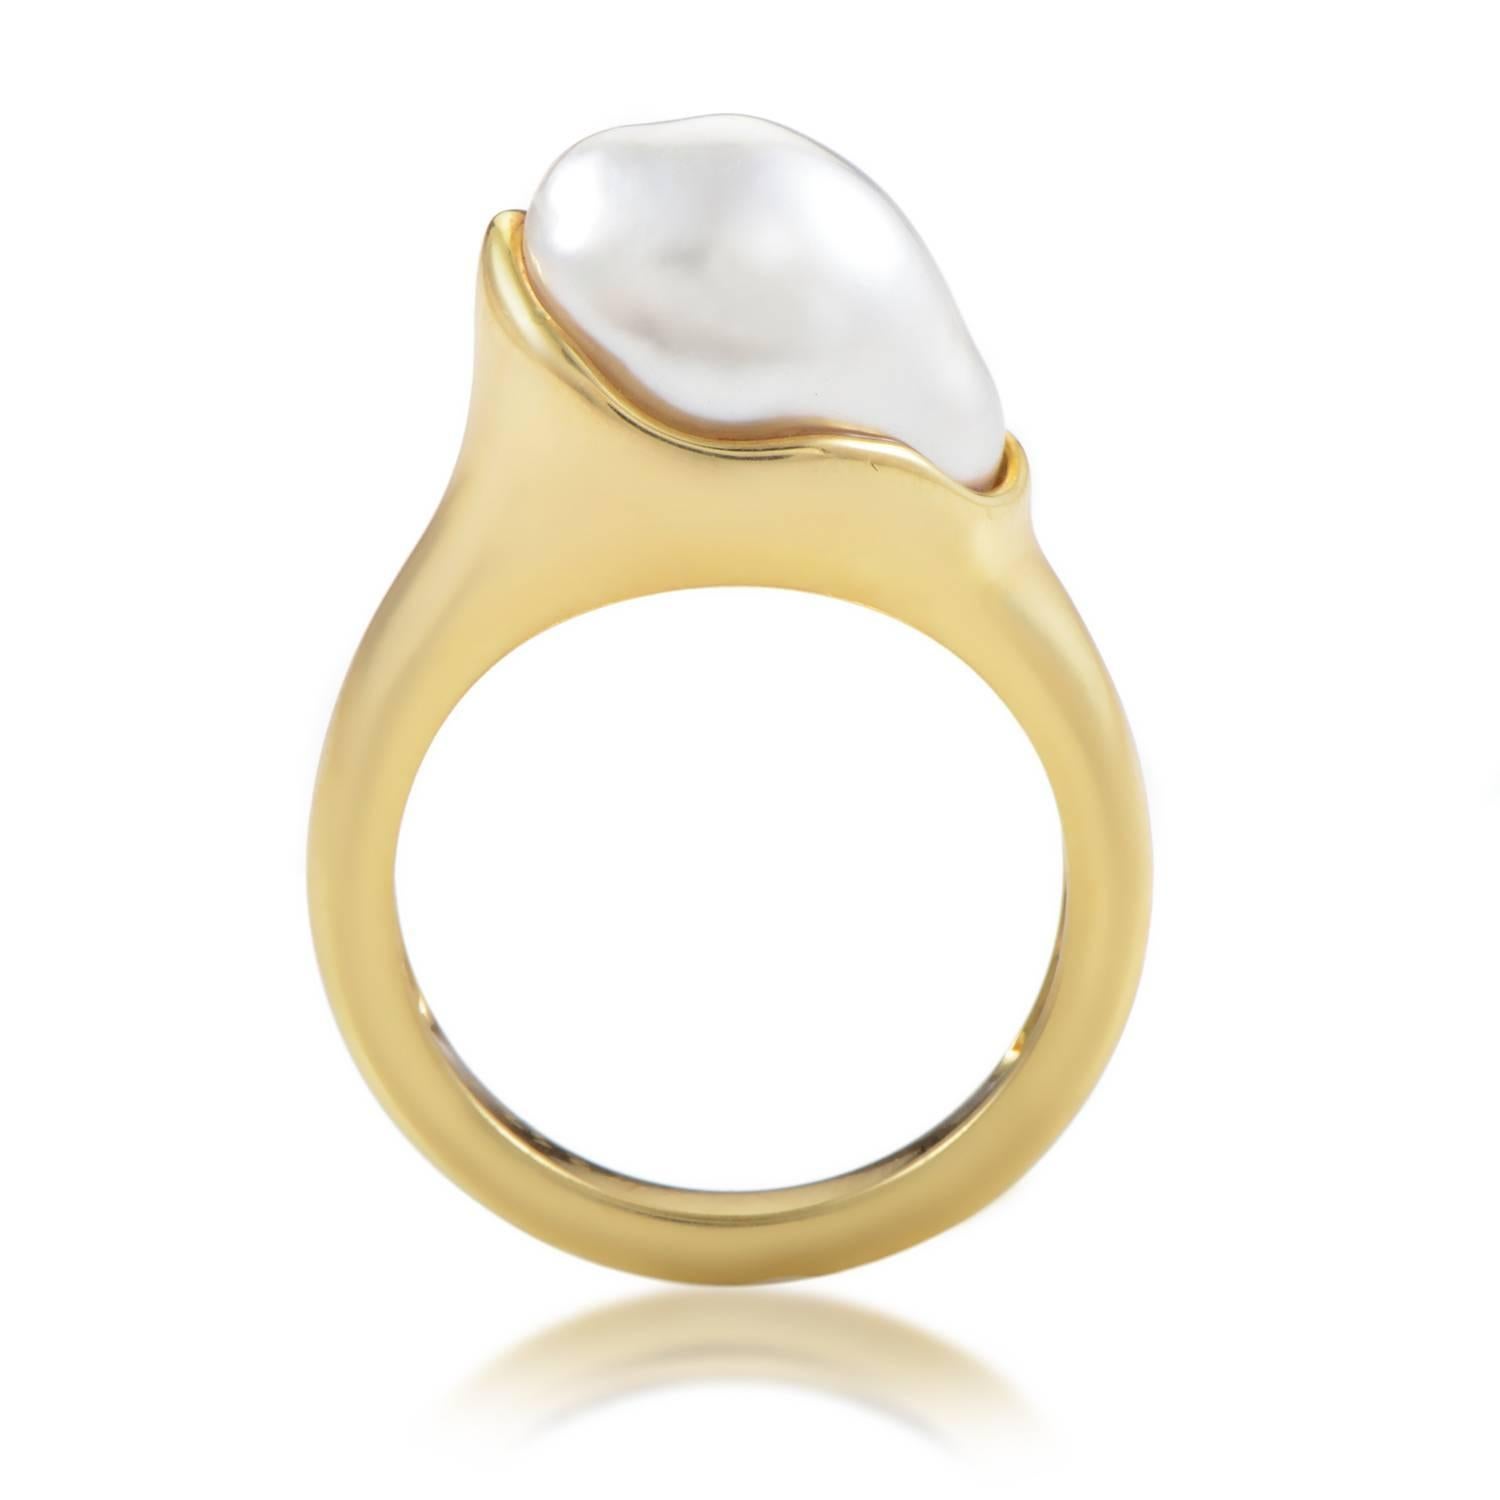 Perfectly complementing the spotless surface and delicate nuance of the magnificent white pearl, the 18K yellow gold in this fantastic ring from Tiffany & Co. is brilliantly crafted to produce a stunning natural feel.
Ring Size: 6.0 (51 1/2)
Band